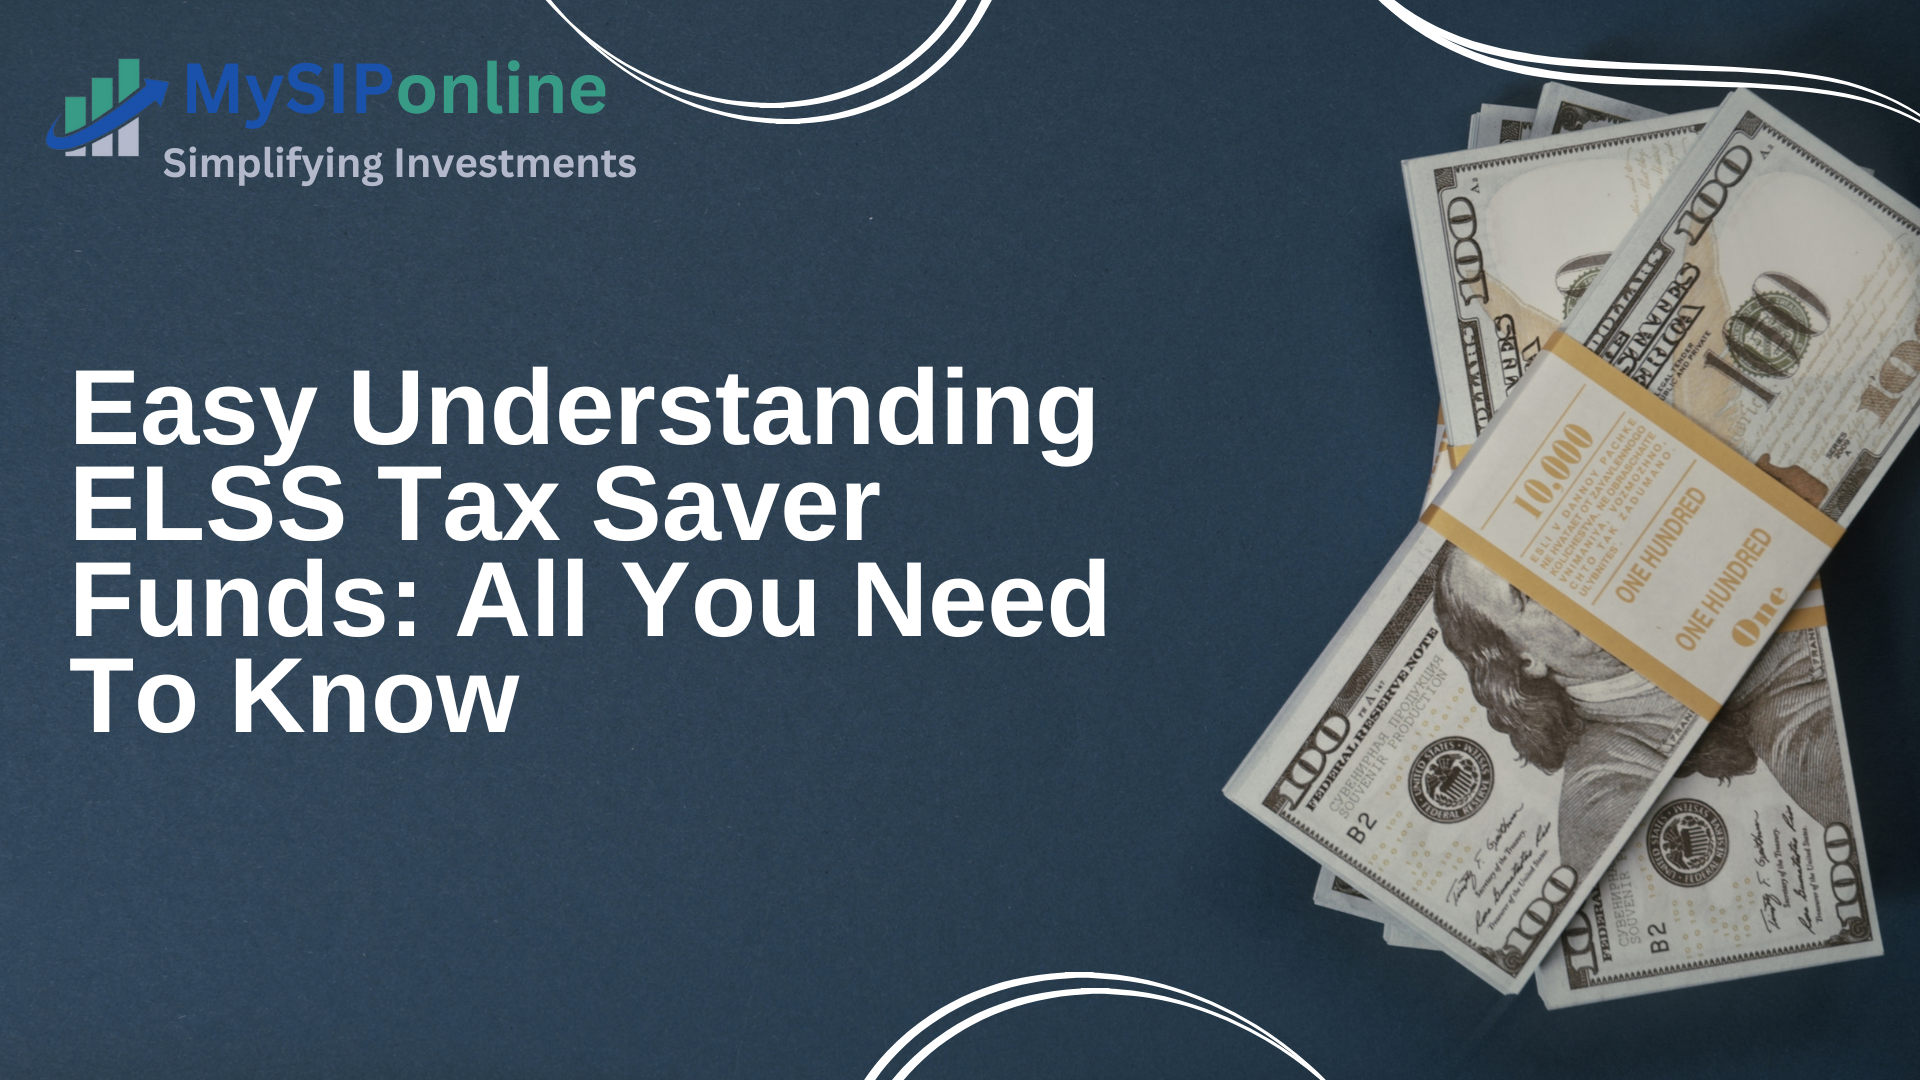 Easy Understanding ELSS Tax Saver Funds: All You Need To Know